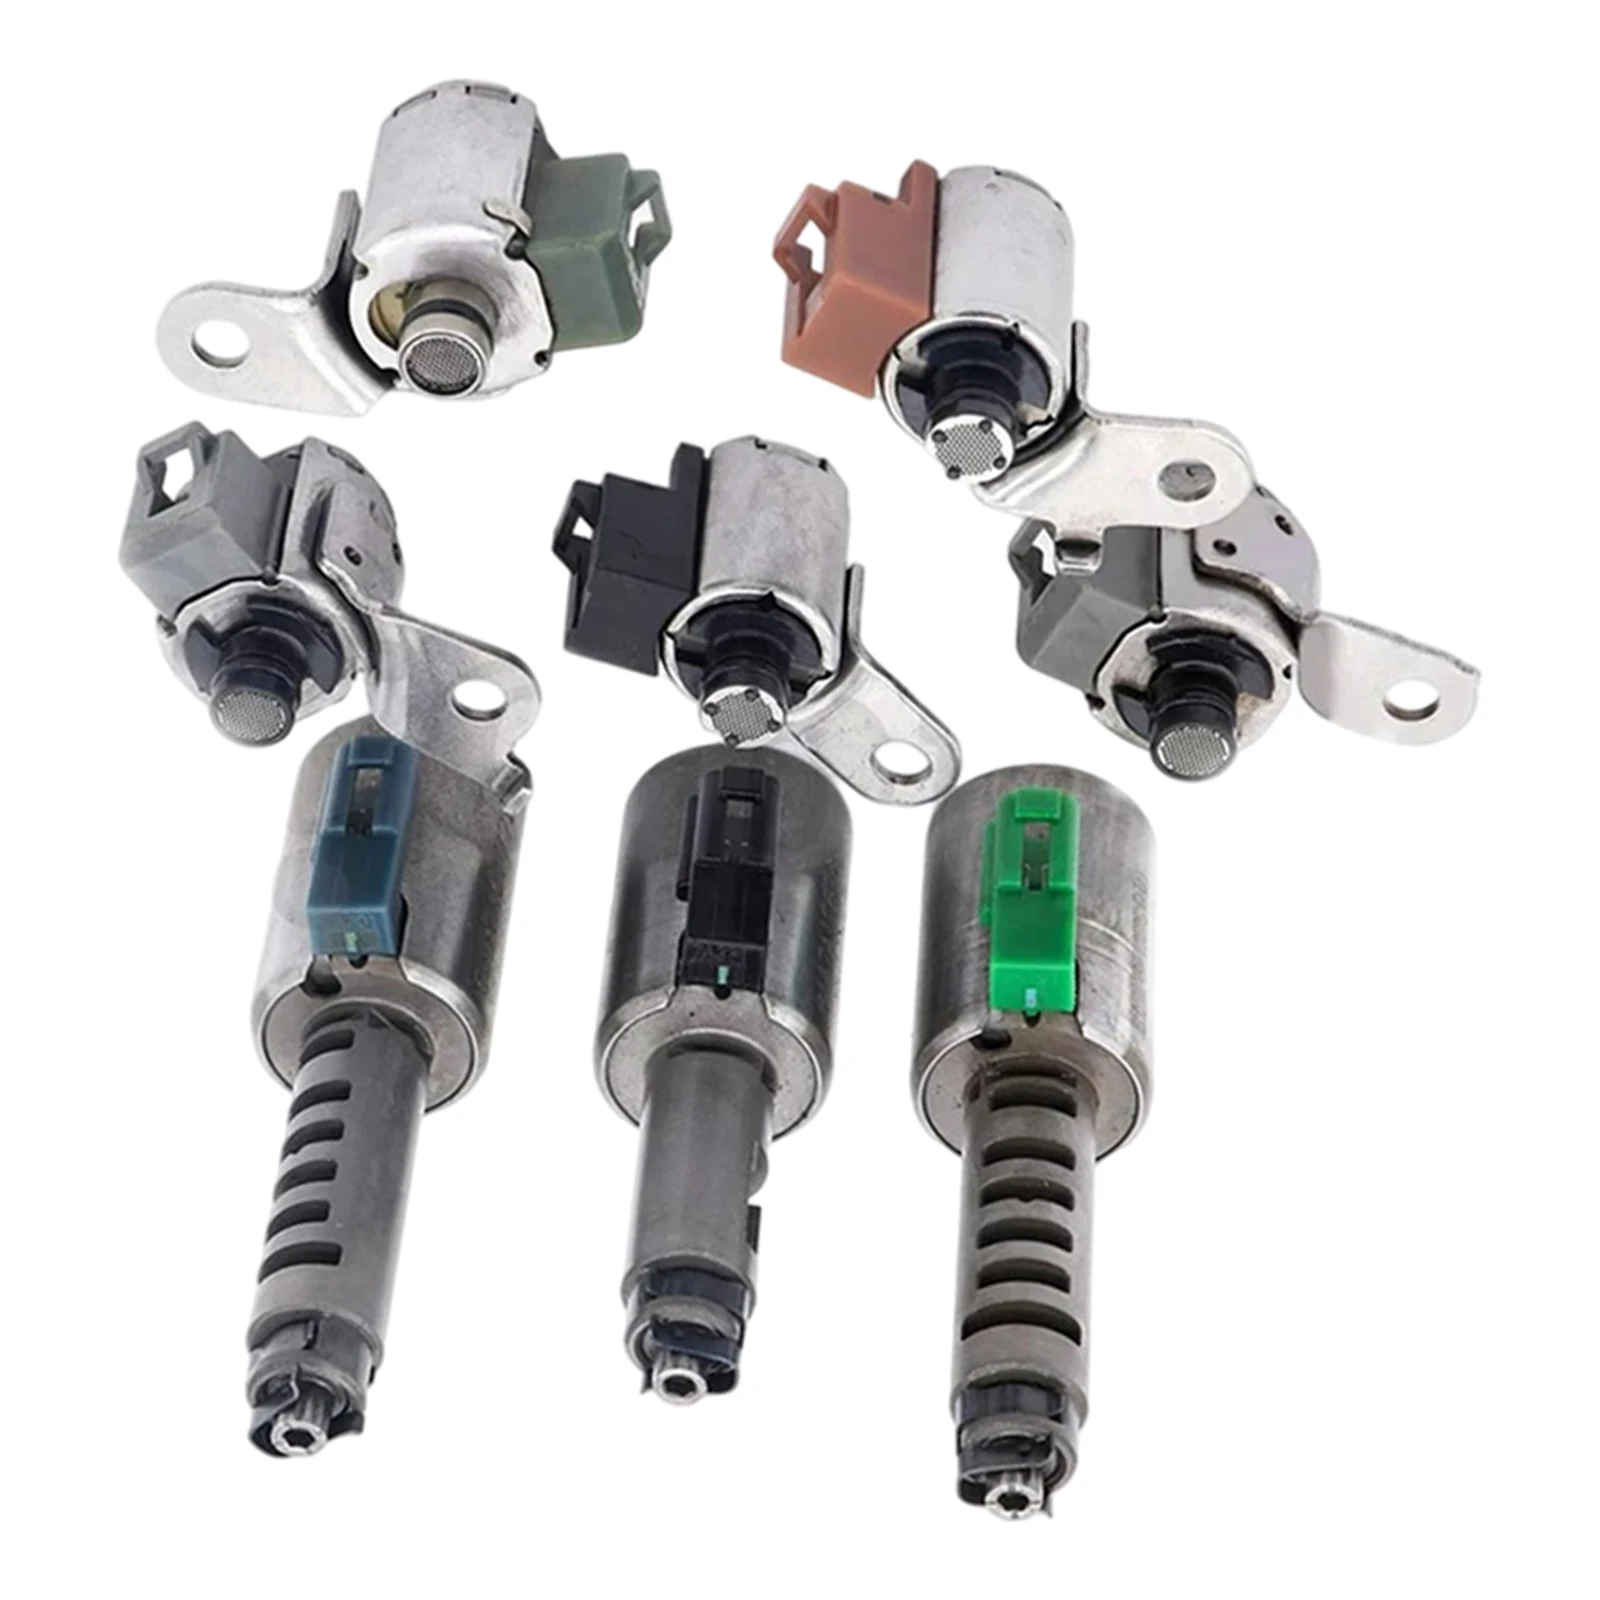 8x AW55-50SN 55-51SN RE5F22A AF33-5 AW235 Transmission Solenoids Car Interchange Accessories Parts for Chevolet Series